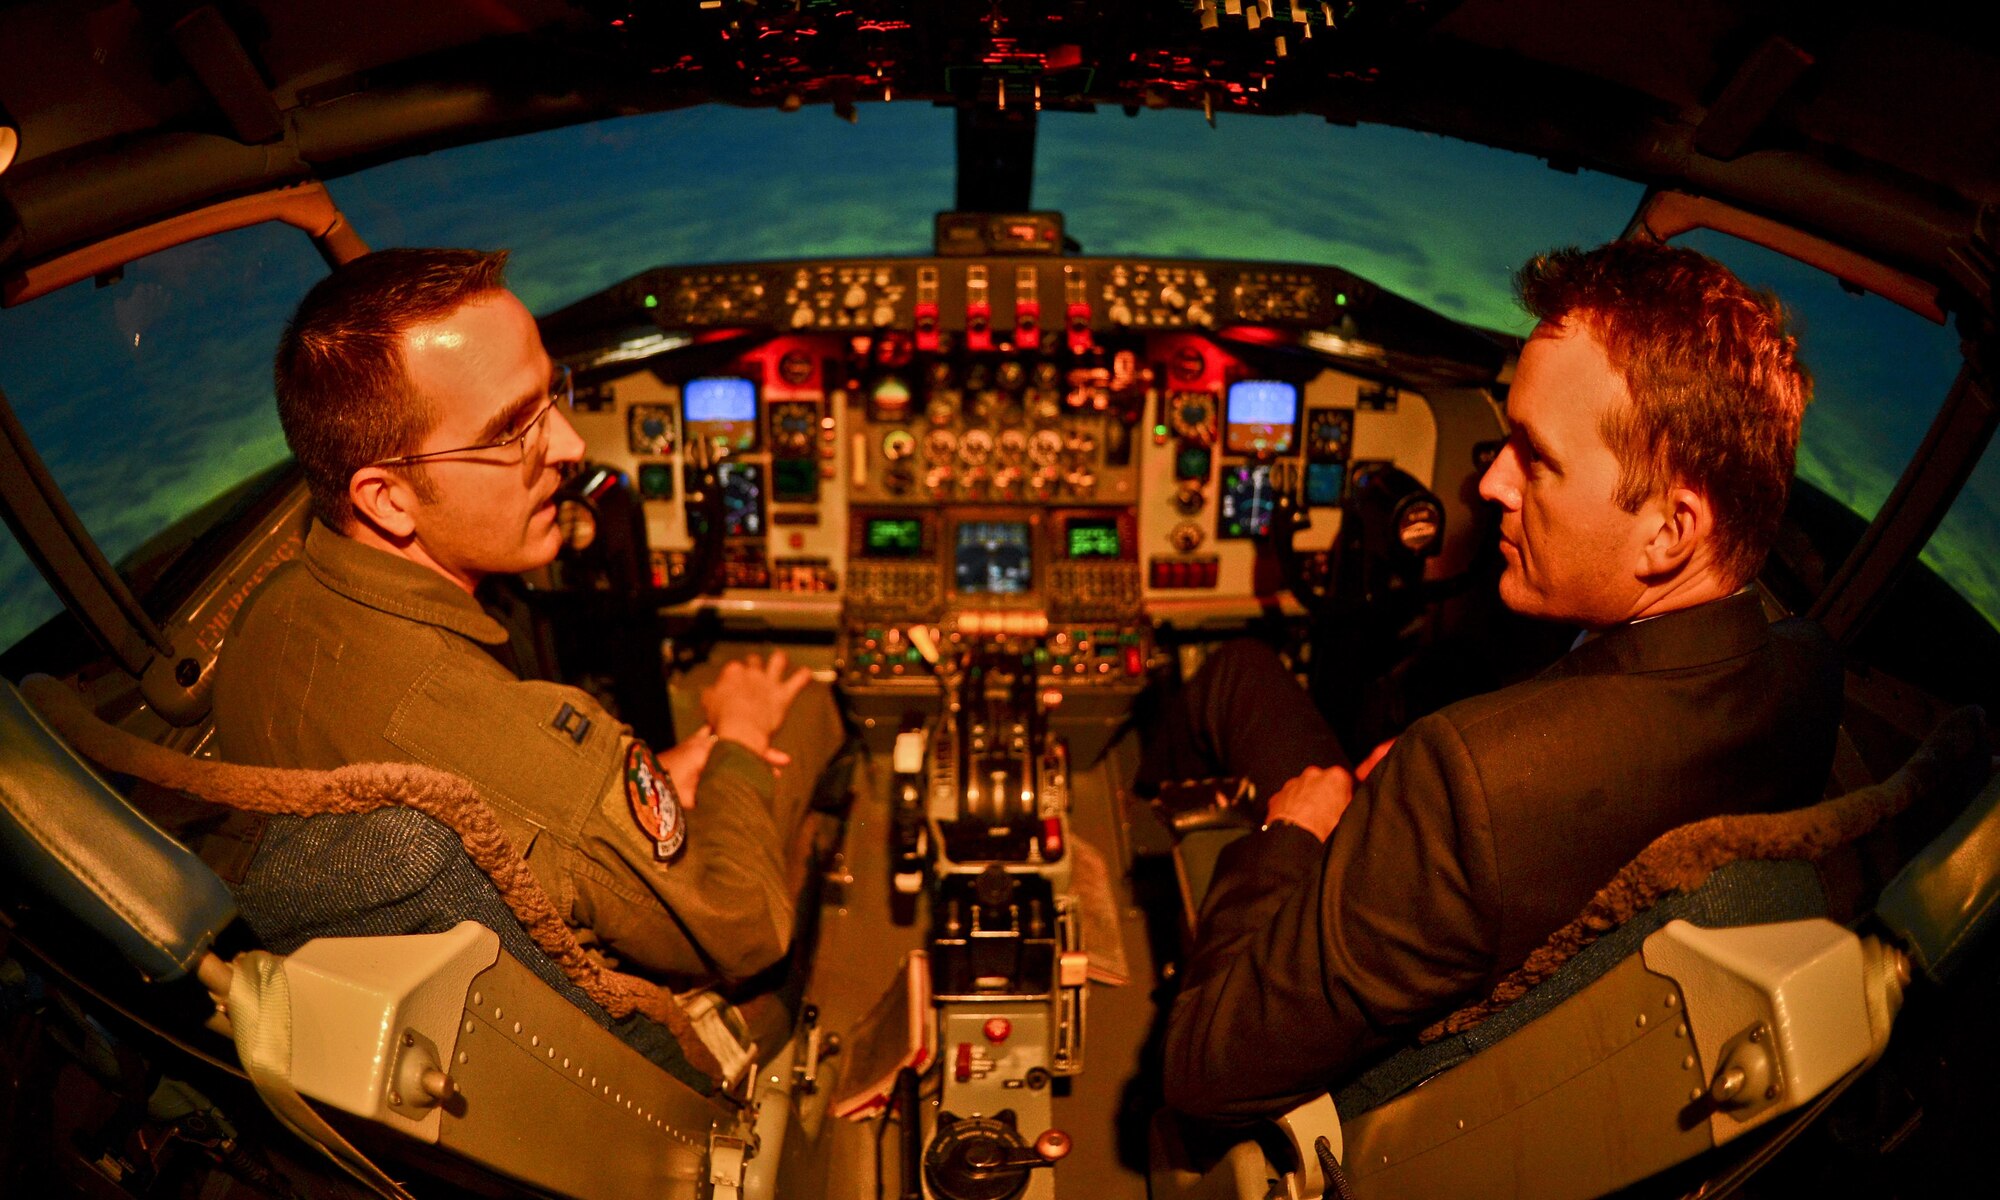 The Acting Secretary of the Air Force Eric Fanning receives lessons from Capt. Steven Whitson, a pilot instructor, in a flight simulator Aug. 29, 2013, at MacDill Air Force Base, Fla.,. The use of simulators are becoming more and more important due to increasing budget constraints. (U.S. Air Force photo/Ned T. Johnston)